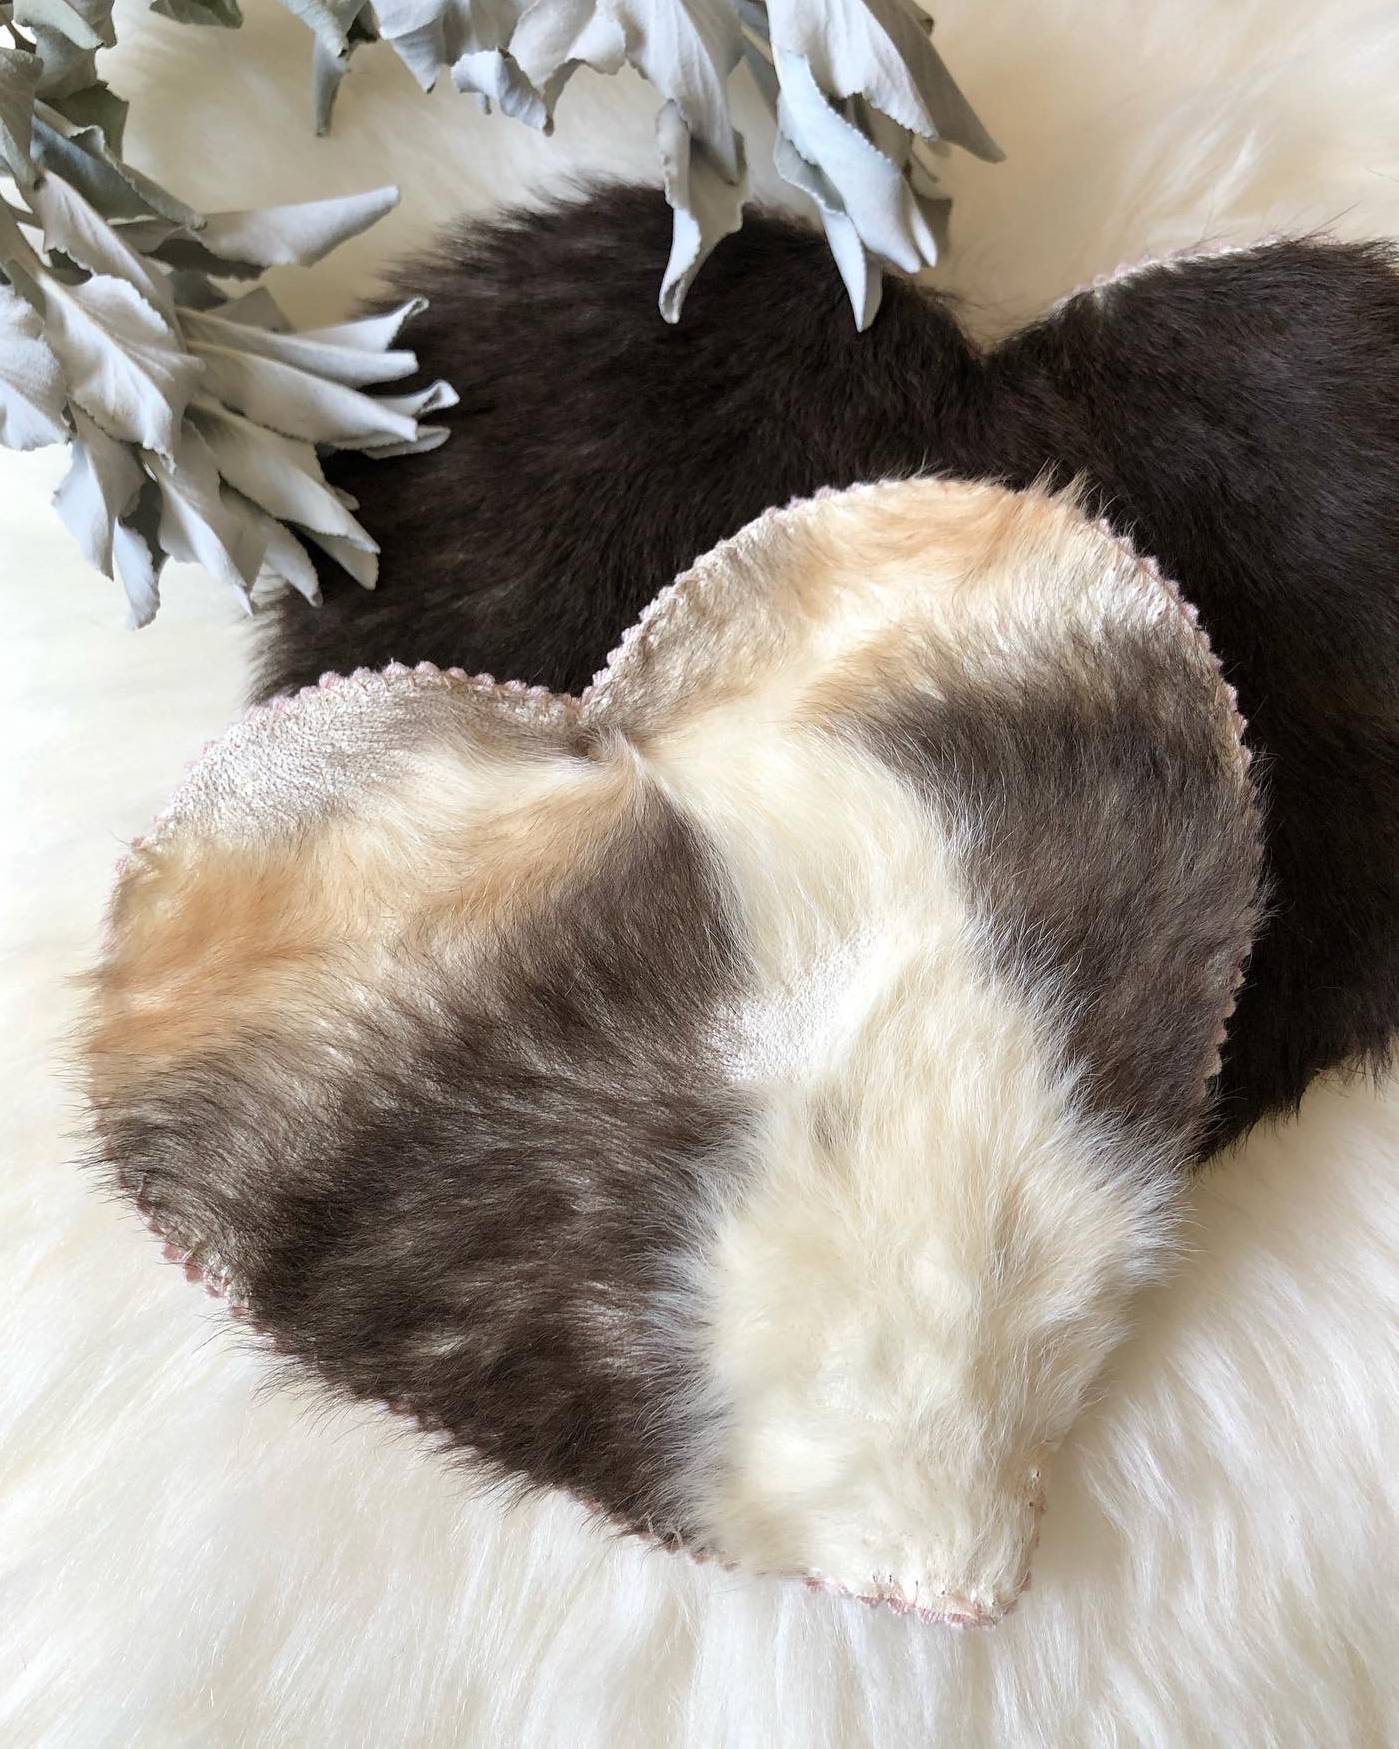 Two heart-shaped fur preservations with some sage off to the side